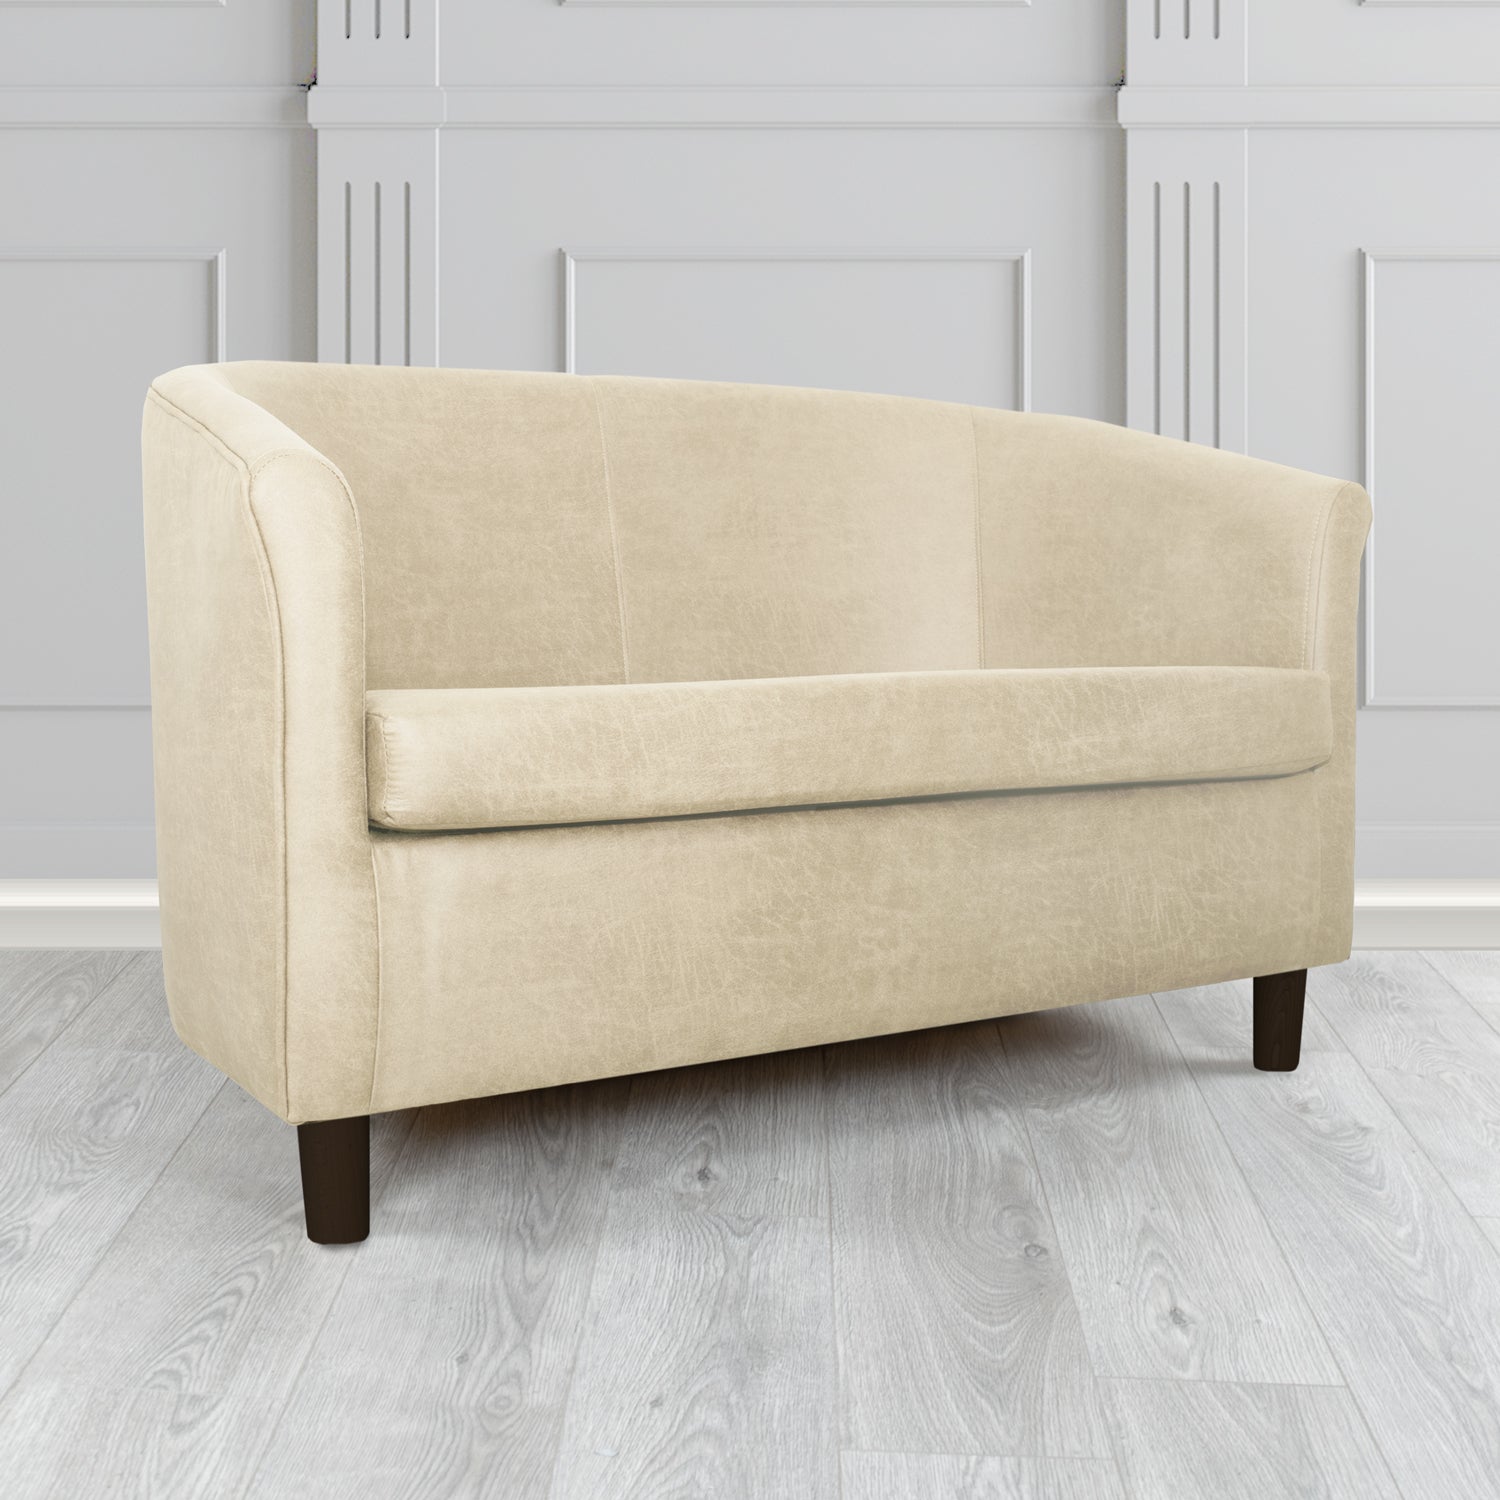 Tuscany 2 Seater Tub Sofa in Nevada Beige Faux Leather - The Tub Chair Shop